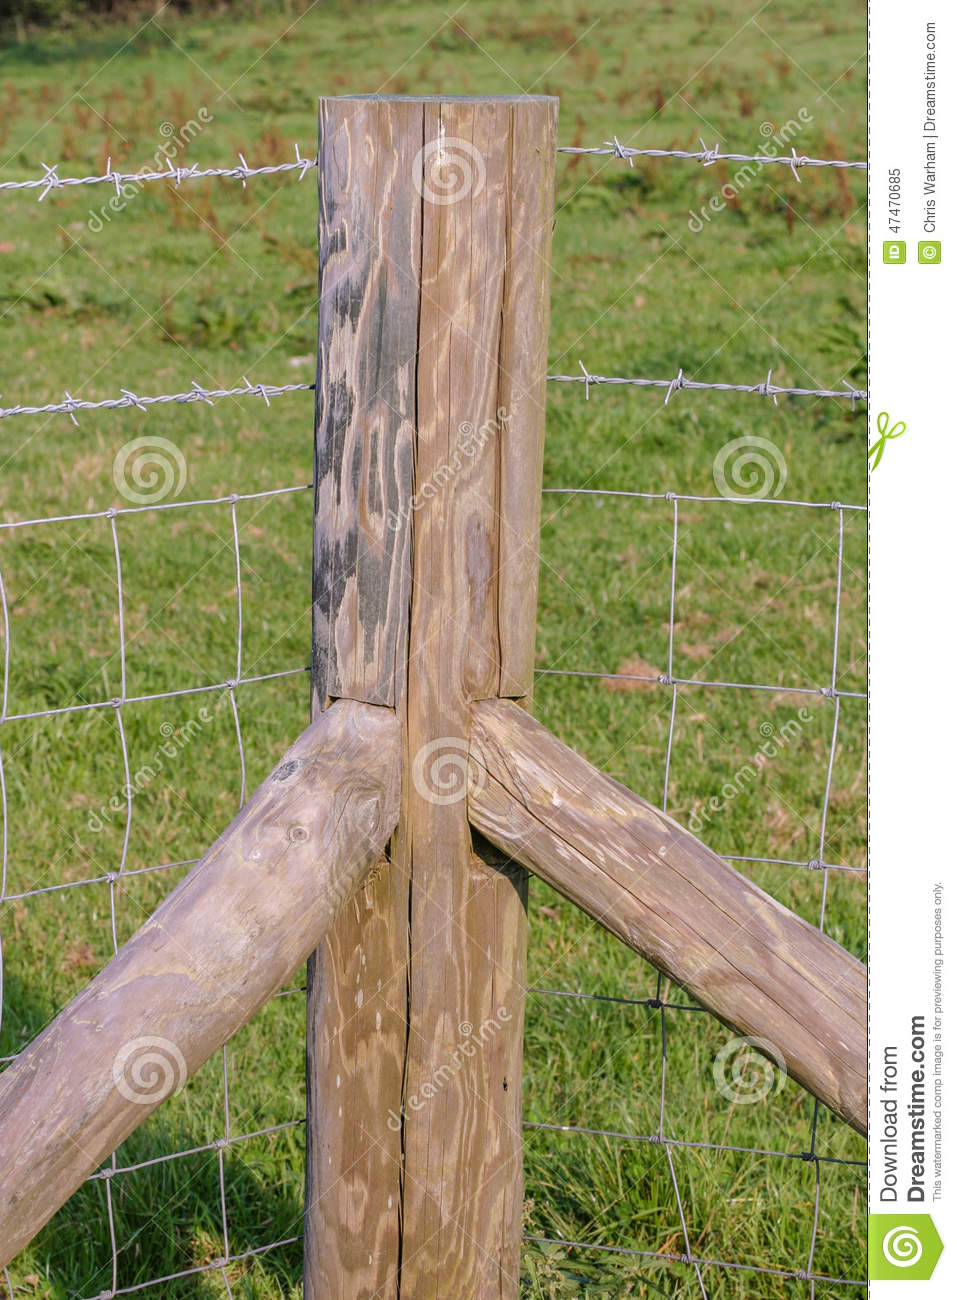 Corner Fence Post With Stock Fence Stock Image Image Of Fencing intended for size 957 X 1300